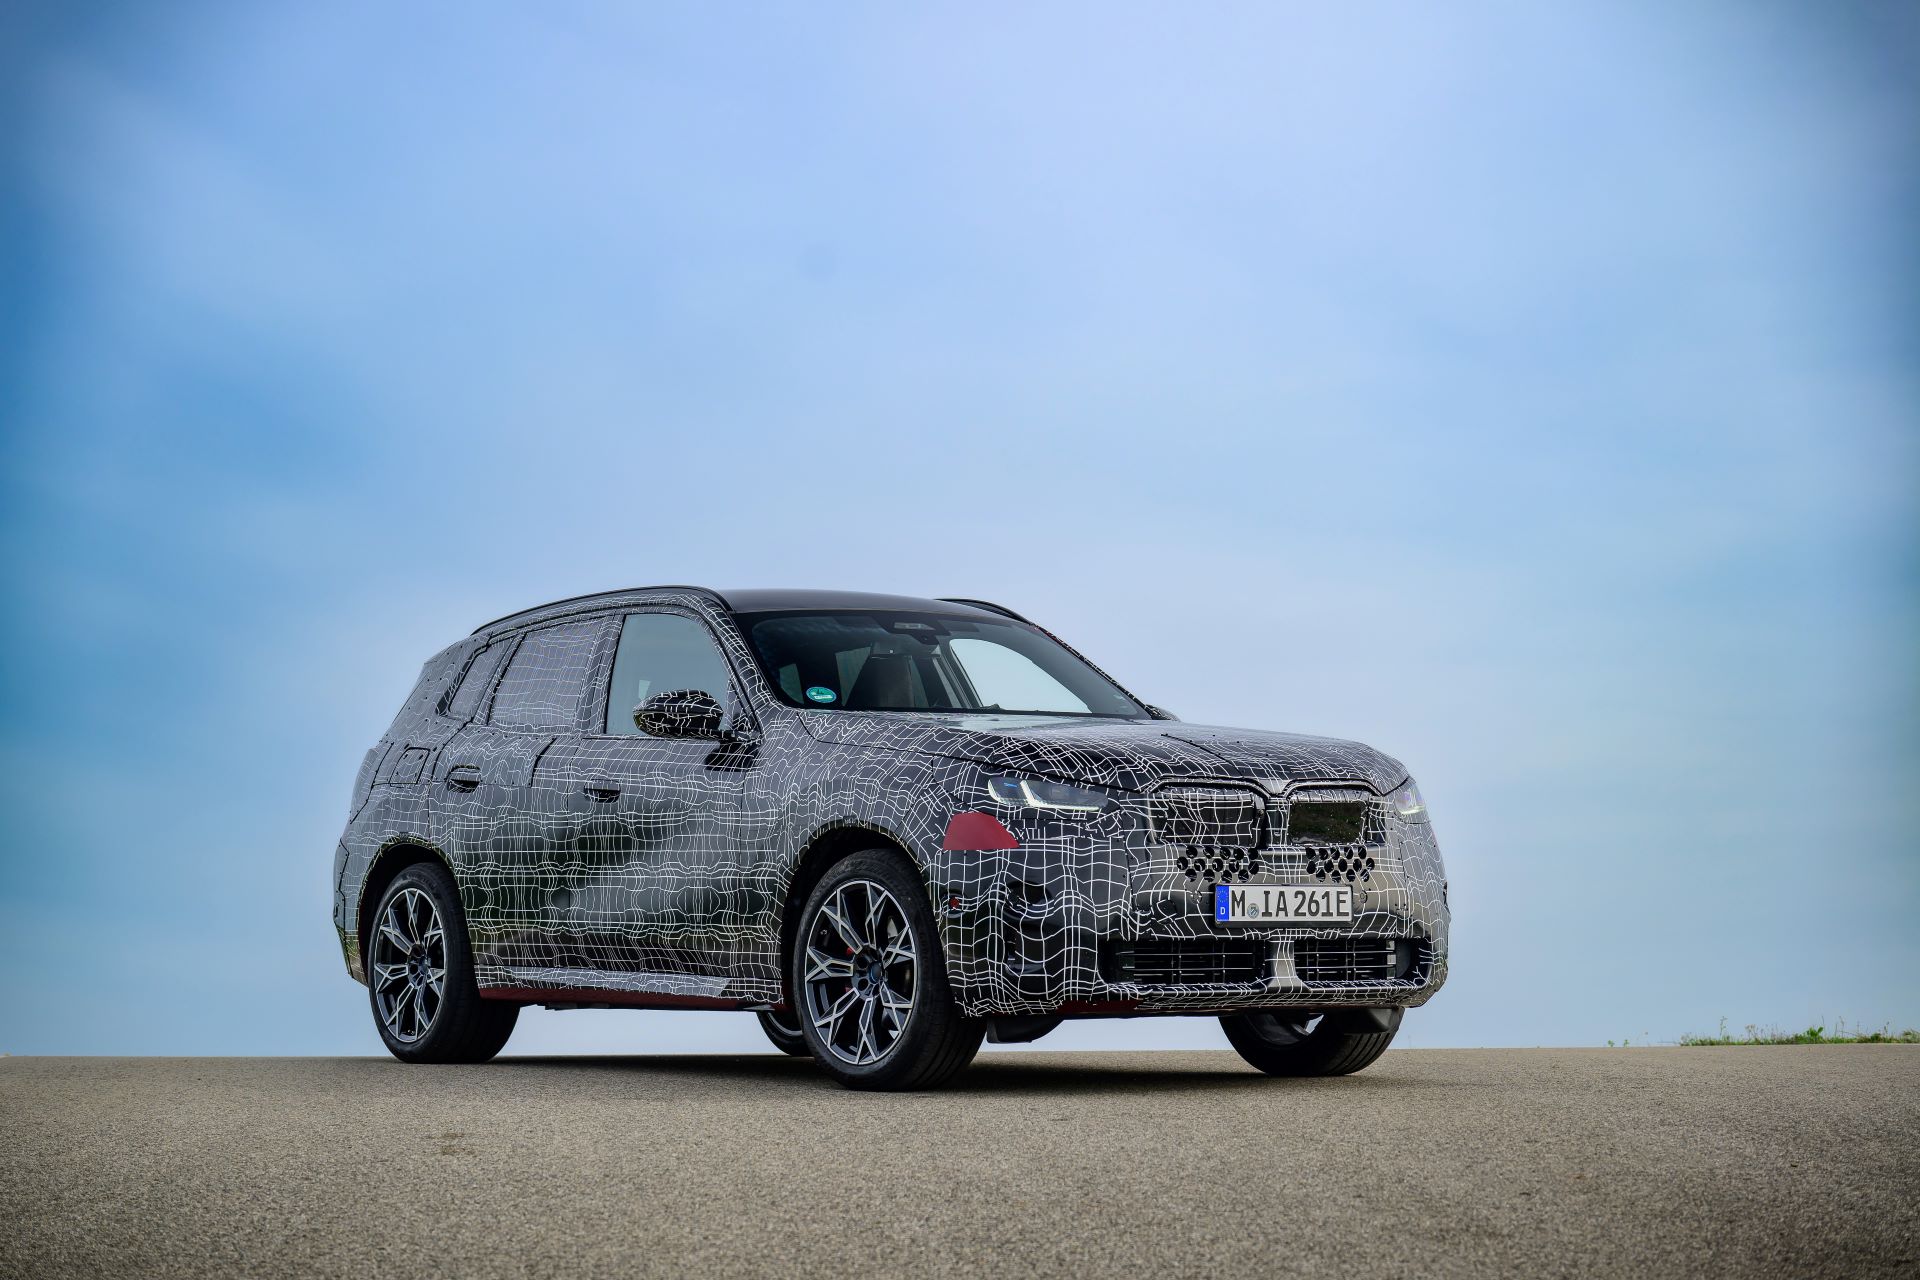 Precise, assured, versatile: The new BMW X3 undergoing dynamic driving tests